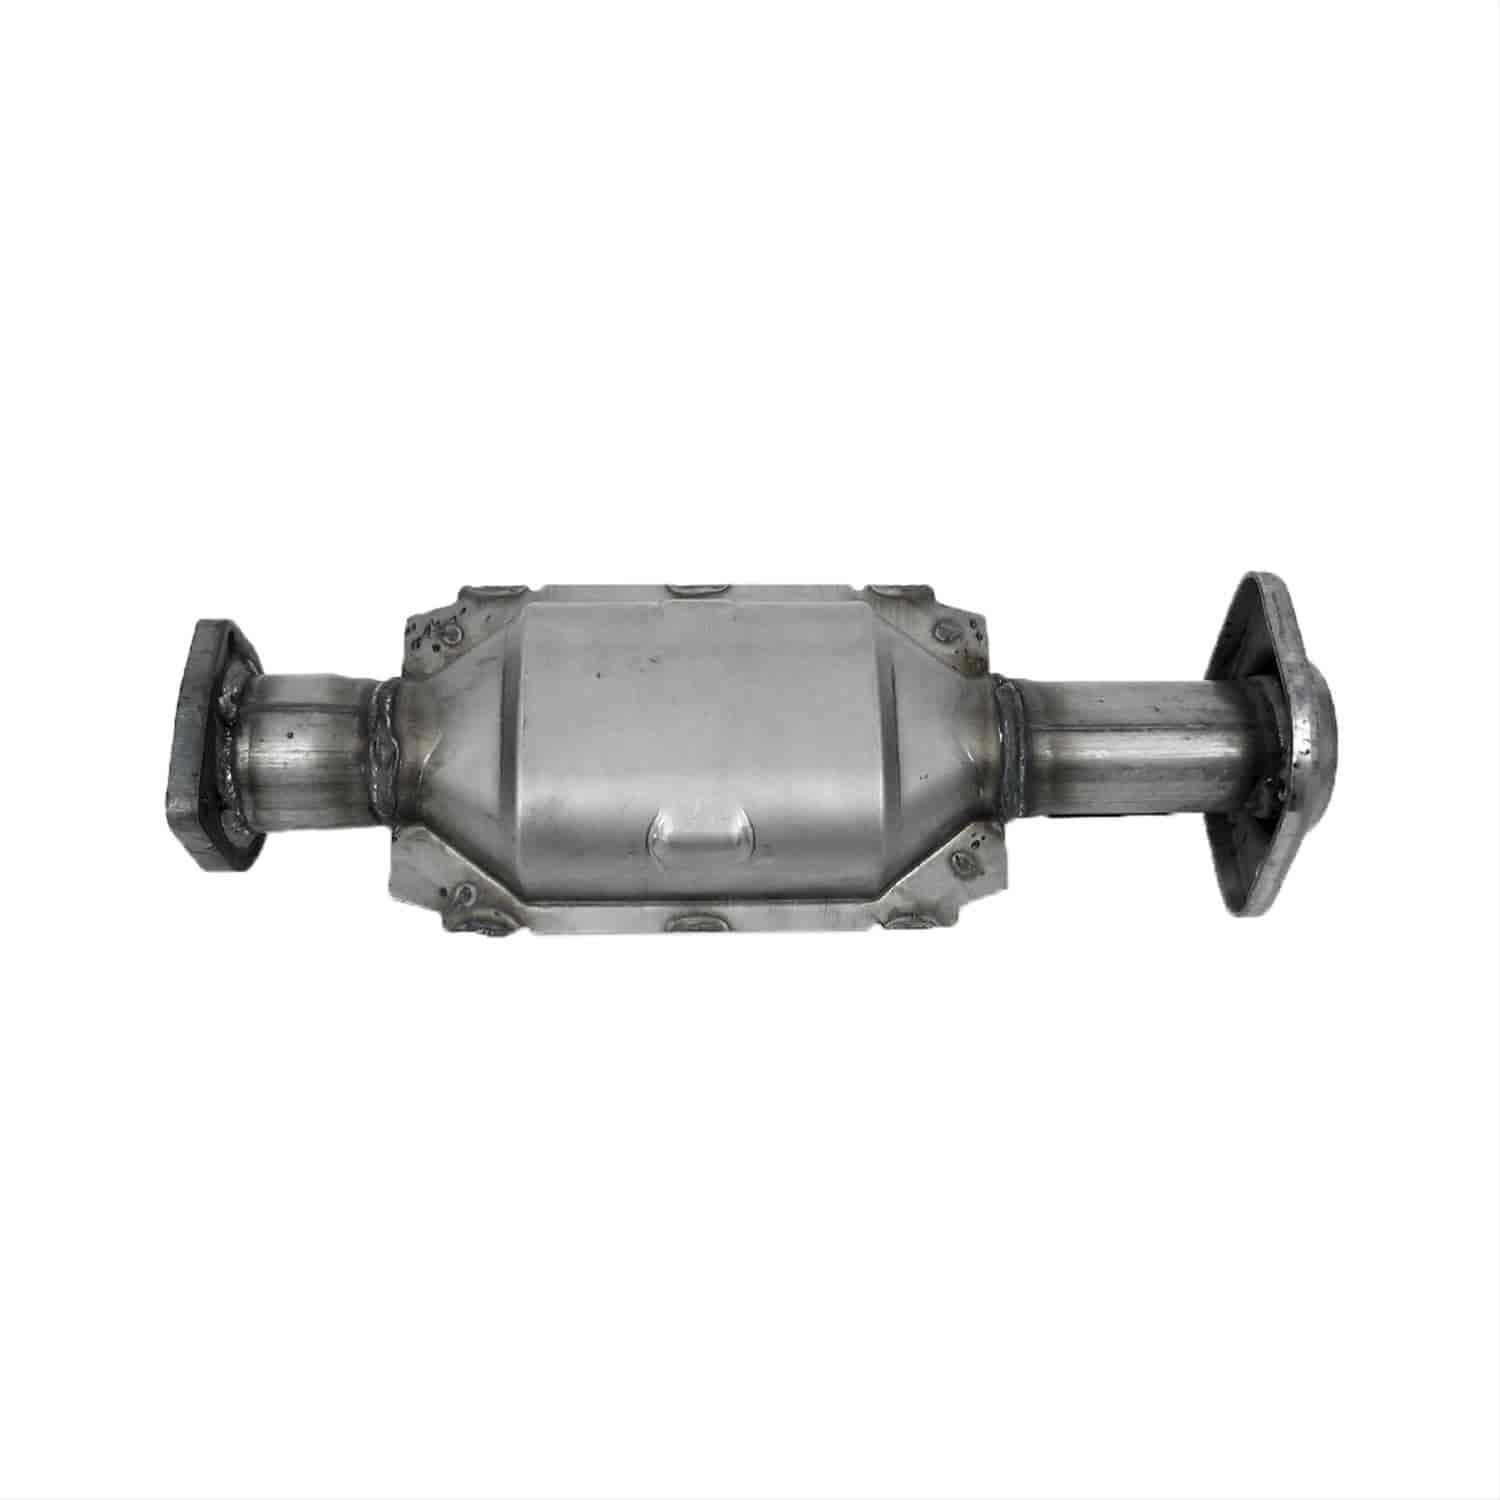 Direct-Fit Catalytic Converter 2000-01 Jeep Cherokee 4.0L